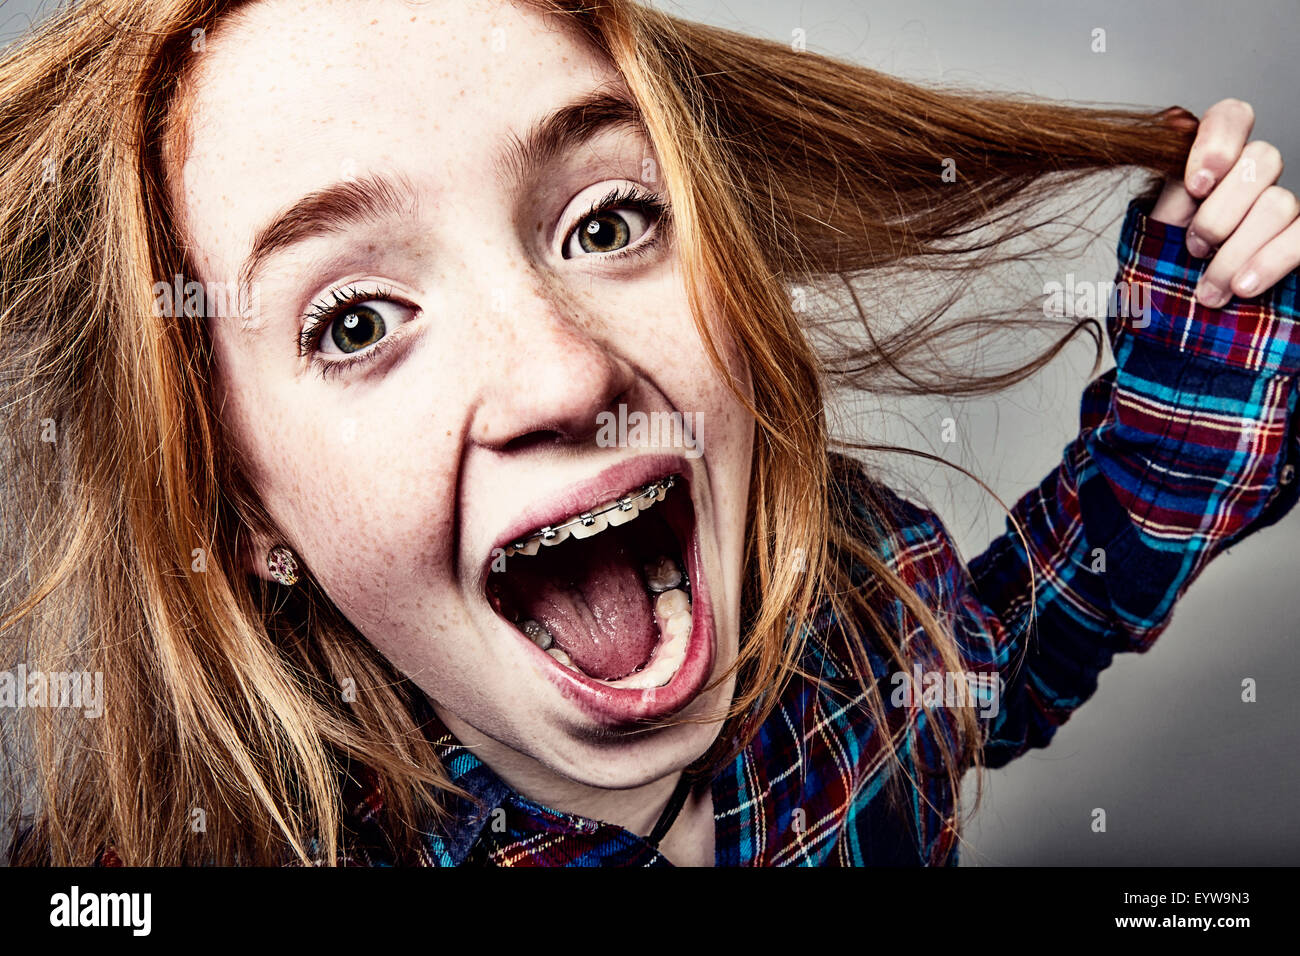 Naughty screaming red-haired girl, portrait Stock Photo